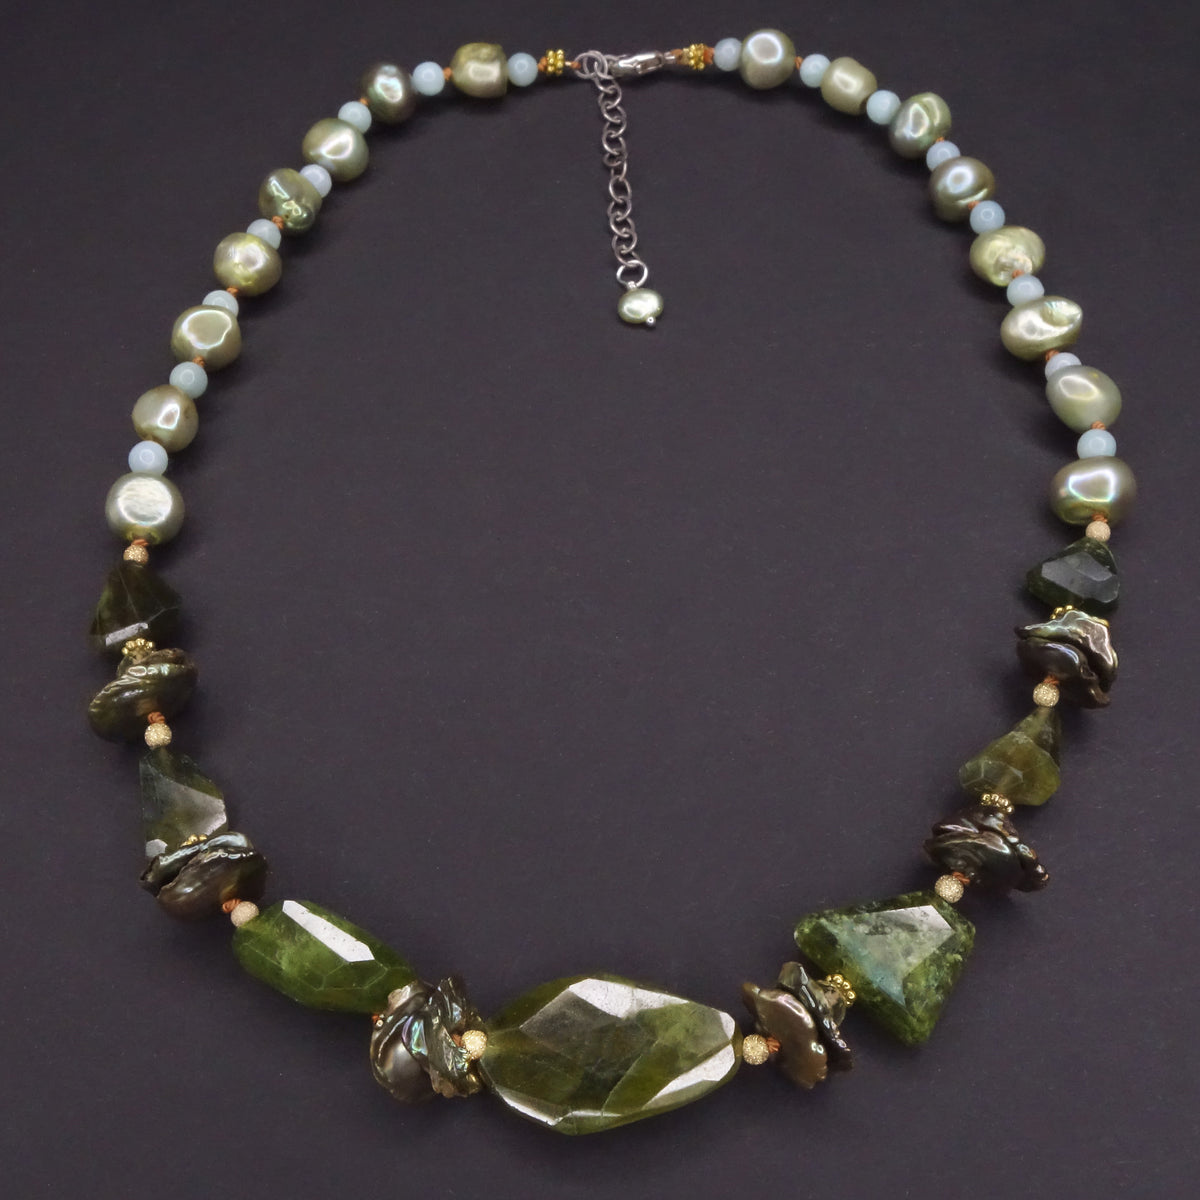 Paris at Night: vessonite, pearl, opal necklace